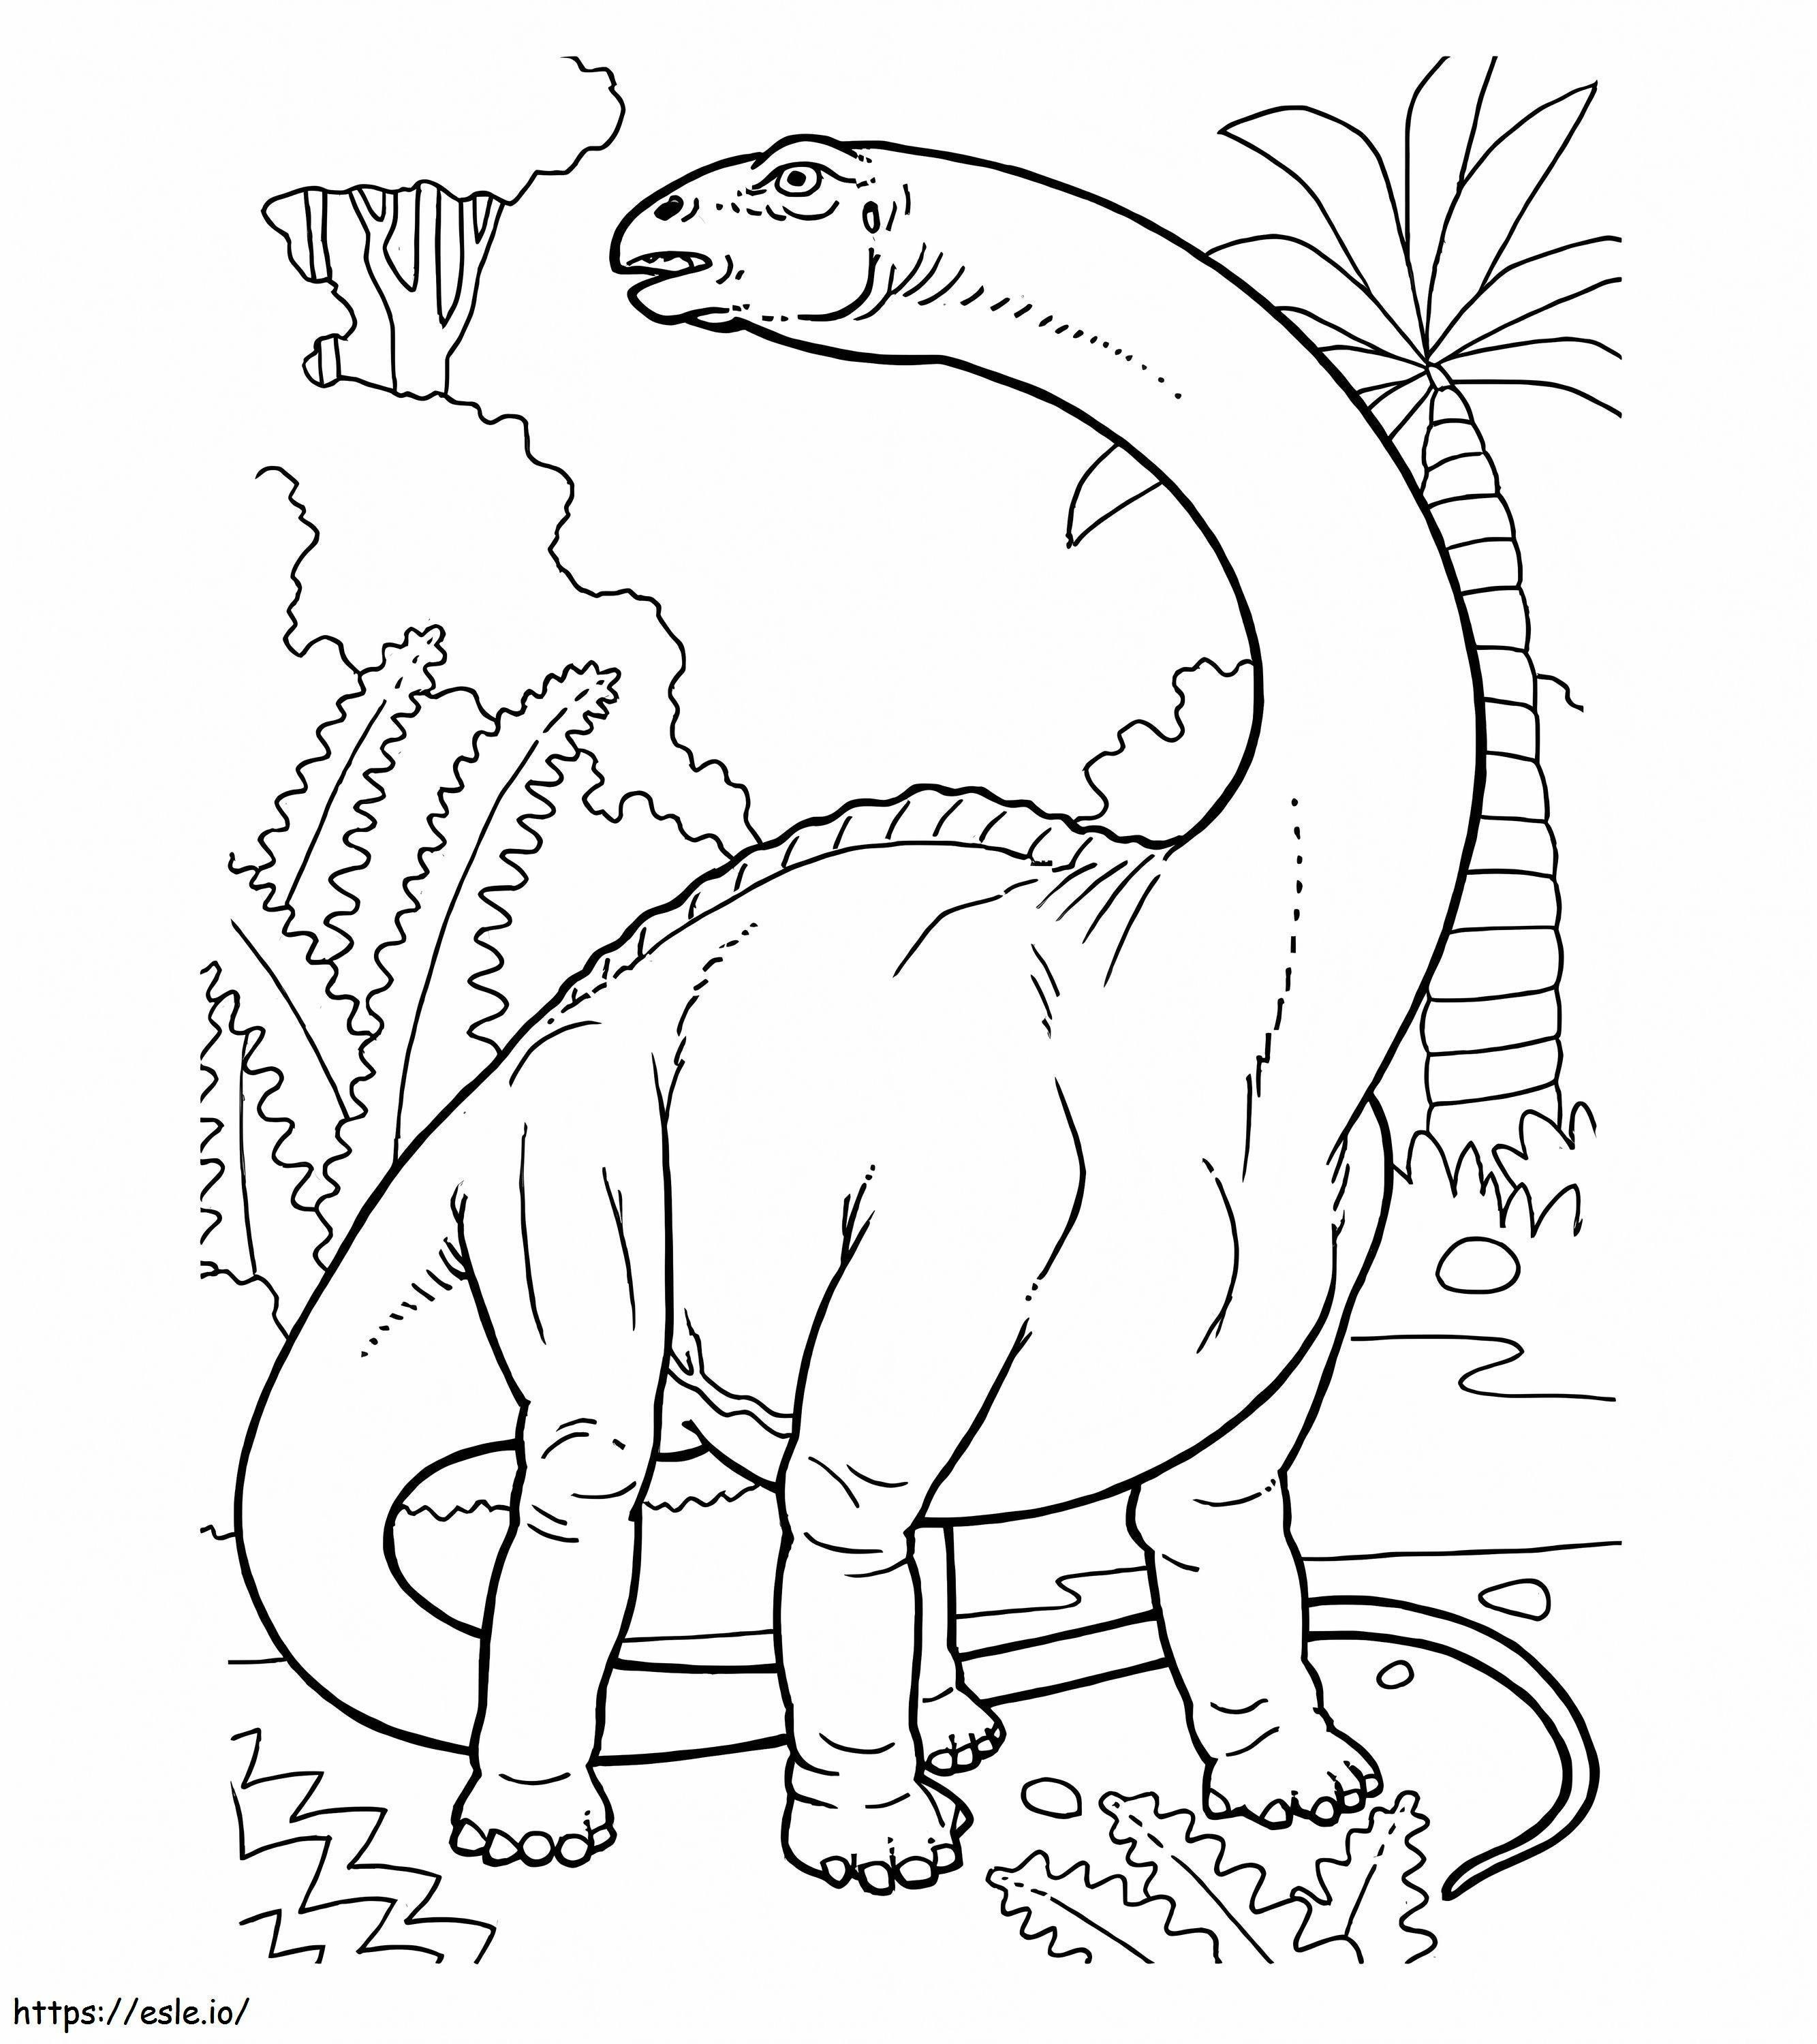 Brontosaurus In The Jungle coloring page